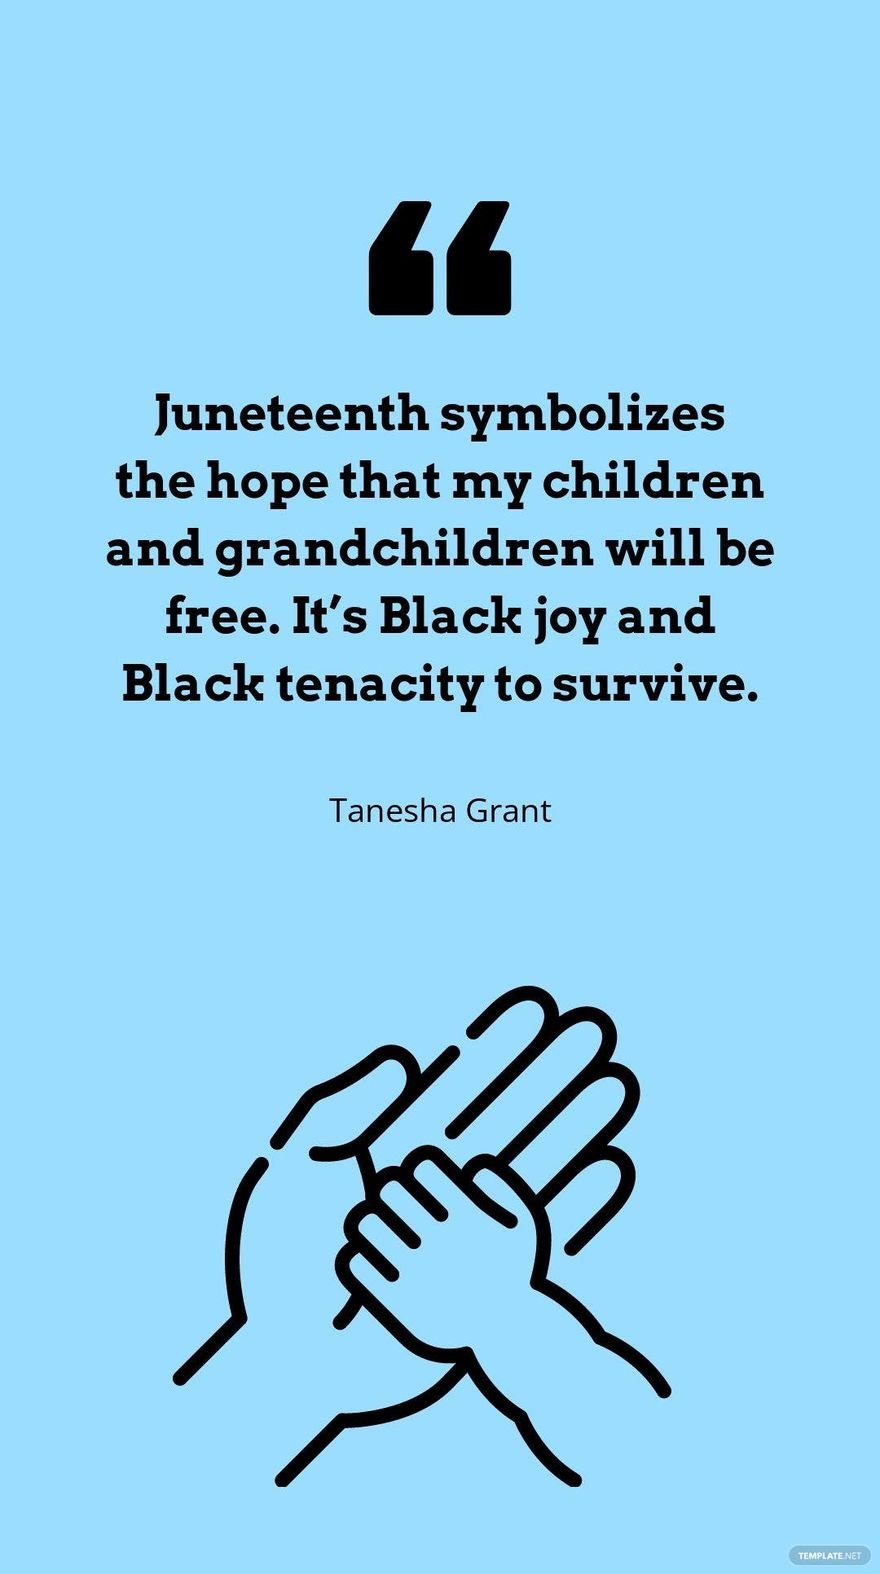 Tanesha Grant - Juneteenth symbolizes the hope that my children and grandchildren will be free. It’s Black joy and Black tenacity to survive. Template